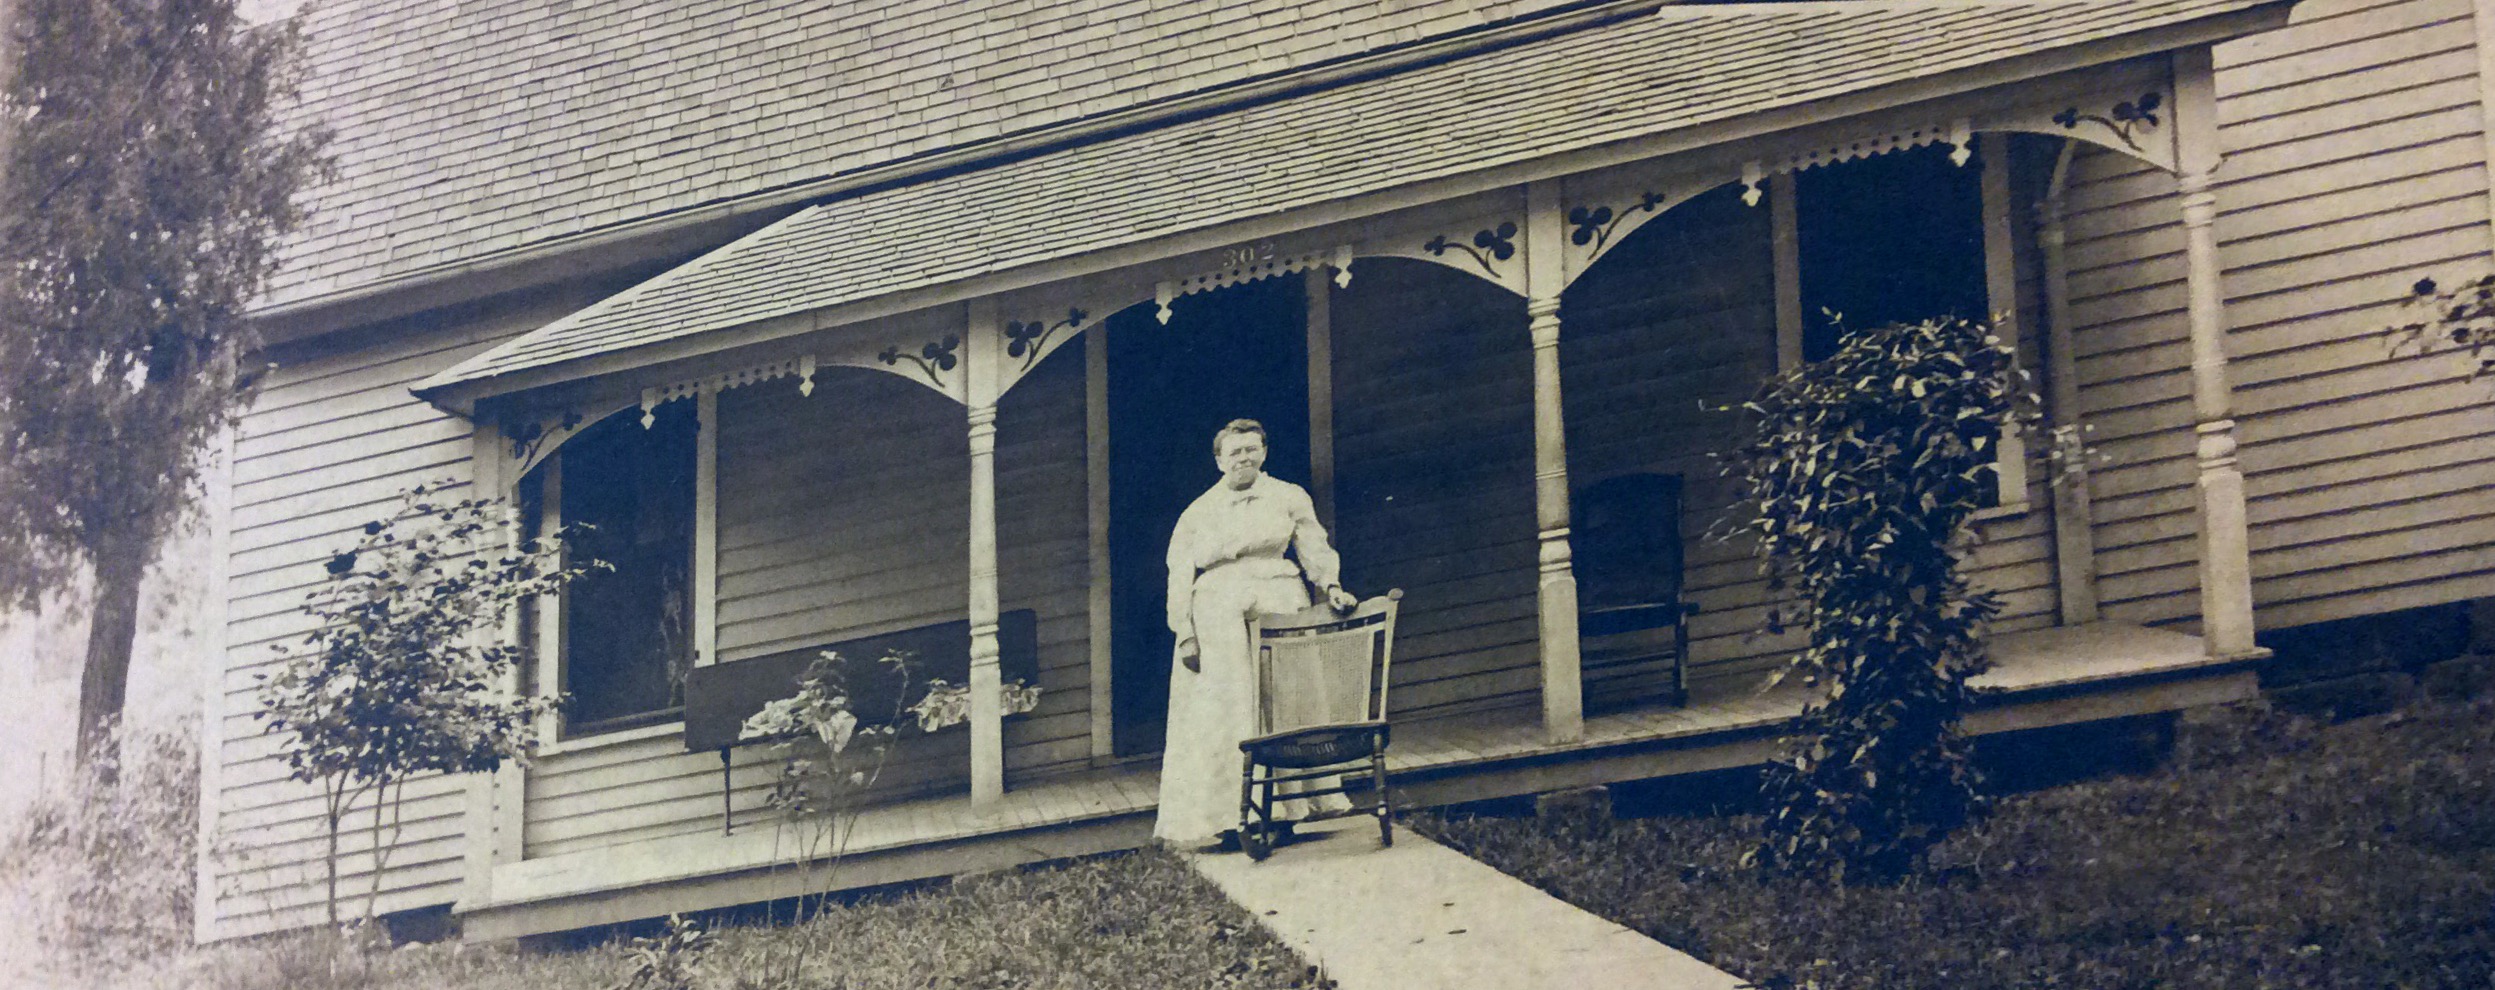 Melissa Katherine Ryan (2/21/1862-11/20/1943) in front of her house in Butler,Mo. date unknown.  My paternal great-grandmother.